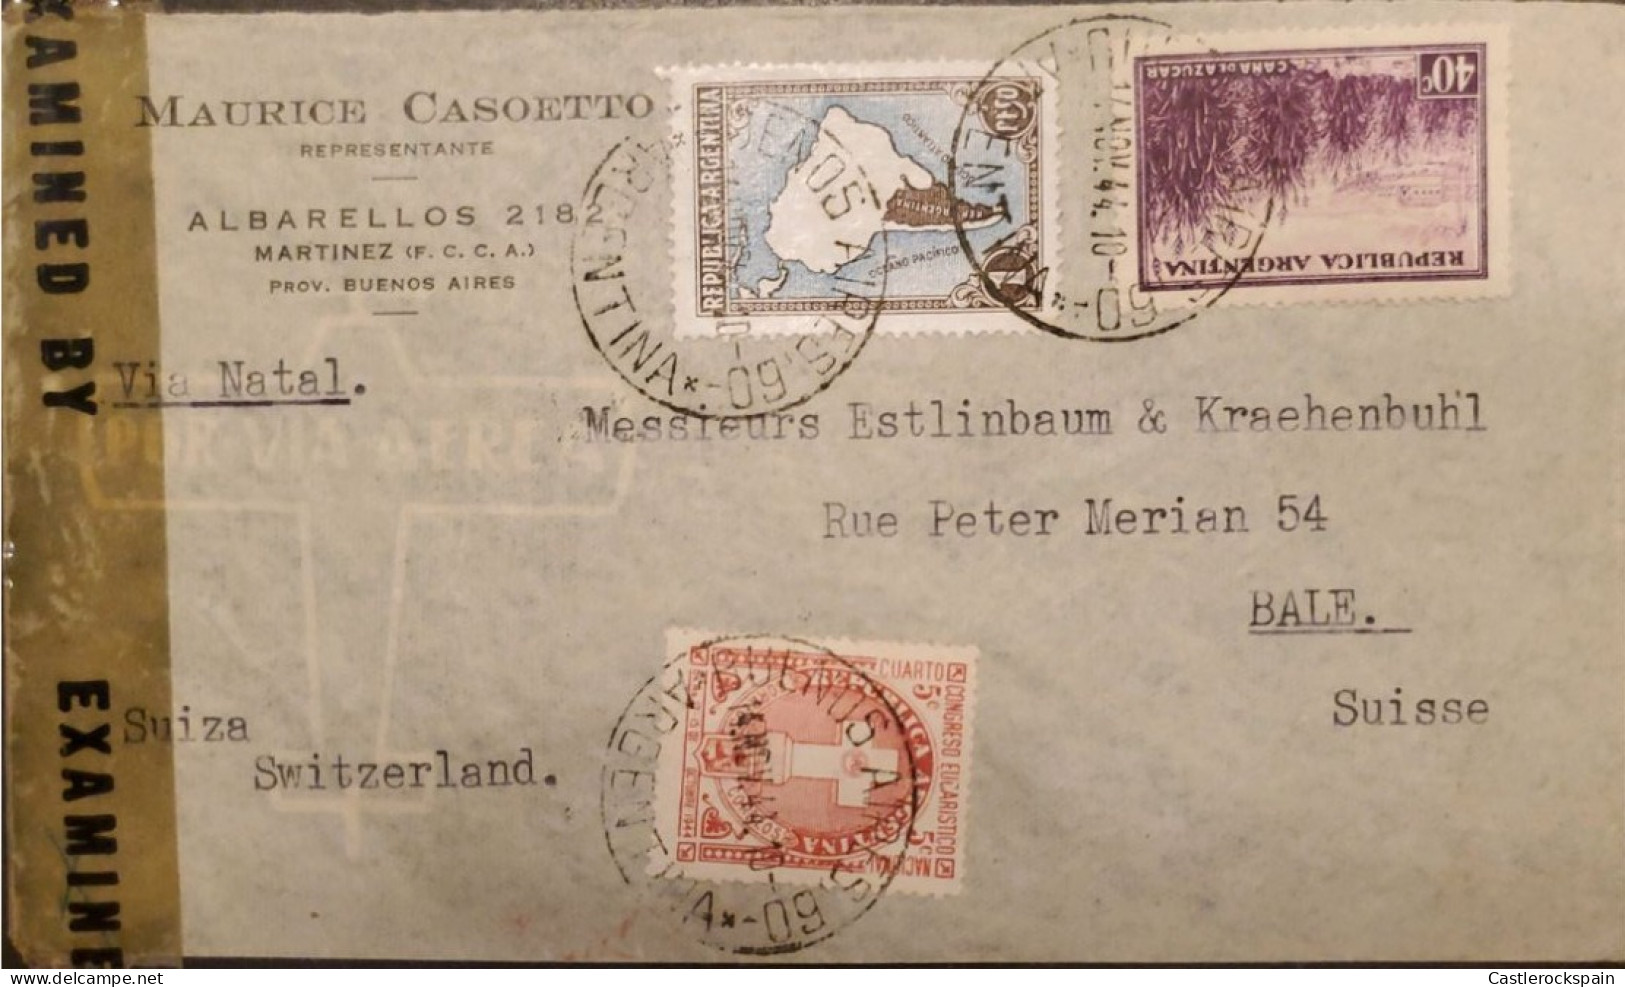 MI) 1944, ARGENTINA, CENSORED, VIA NATAL, FROM BUENOS AIRES TO SWITZERLAND, AIR MAIL, SUGAR CANE, MAP OF ARGENTINA WITHO - Used Stamps